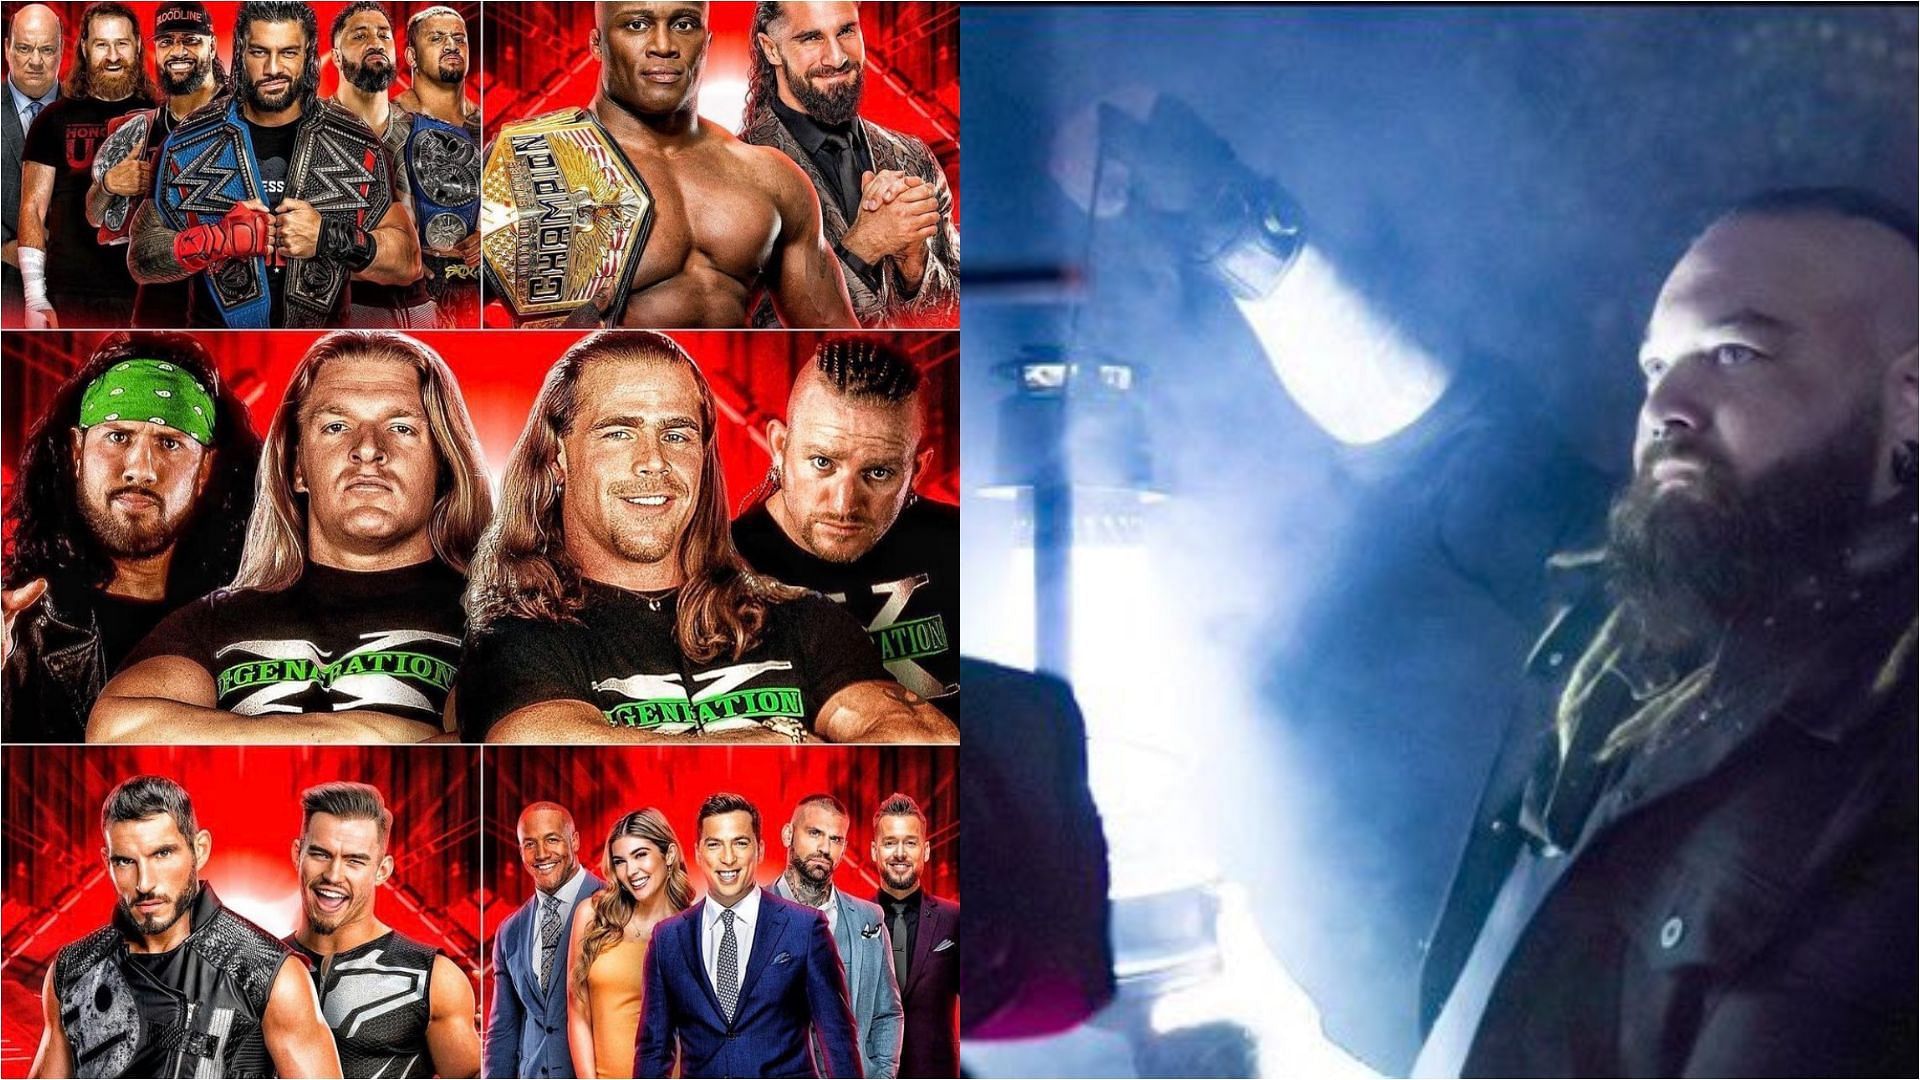 The WWE RAW season premiere is already stacked, but could get even better